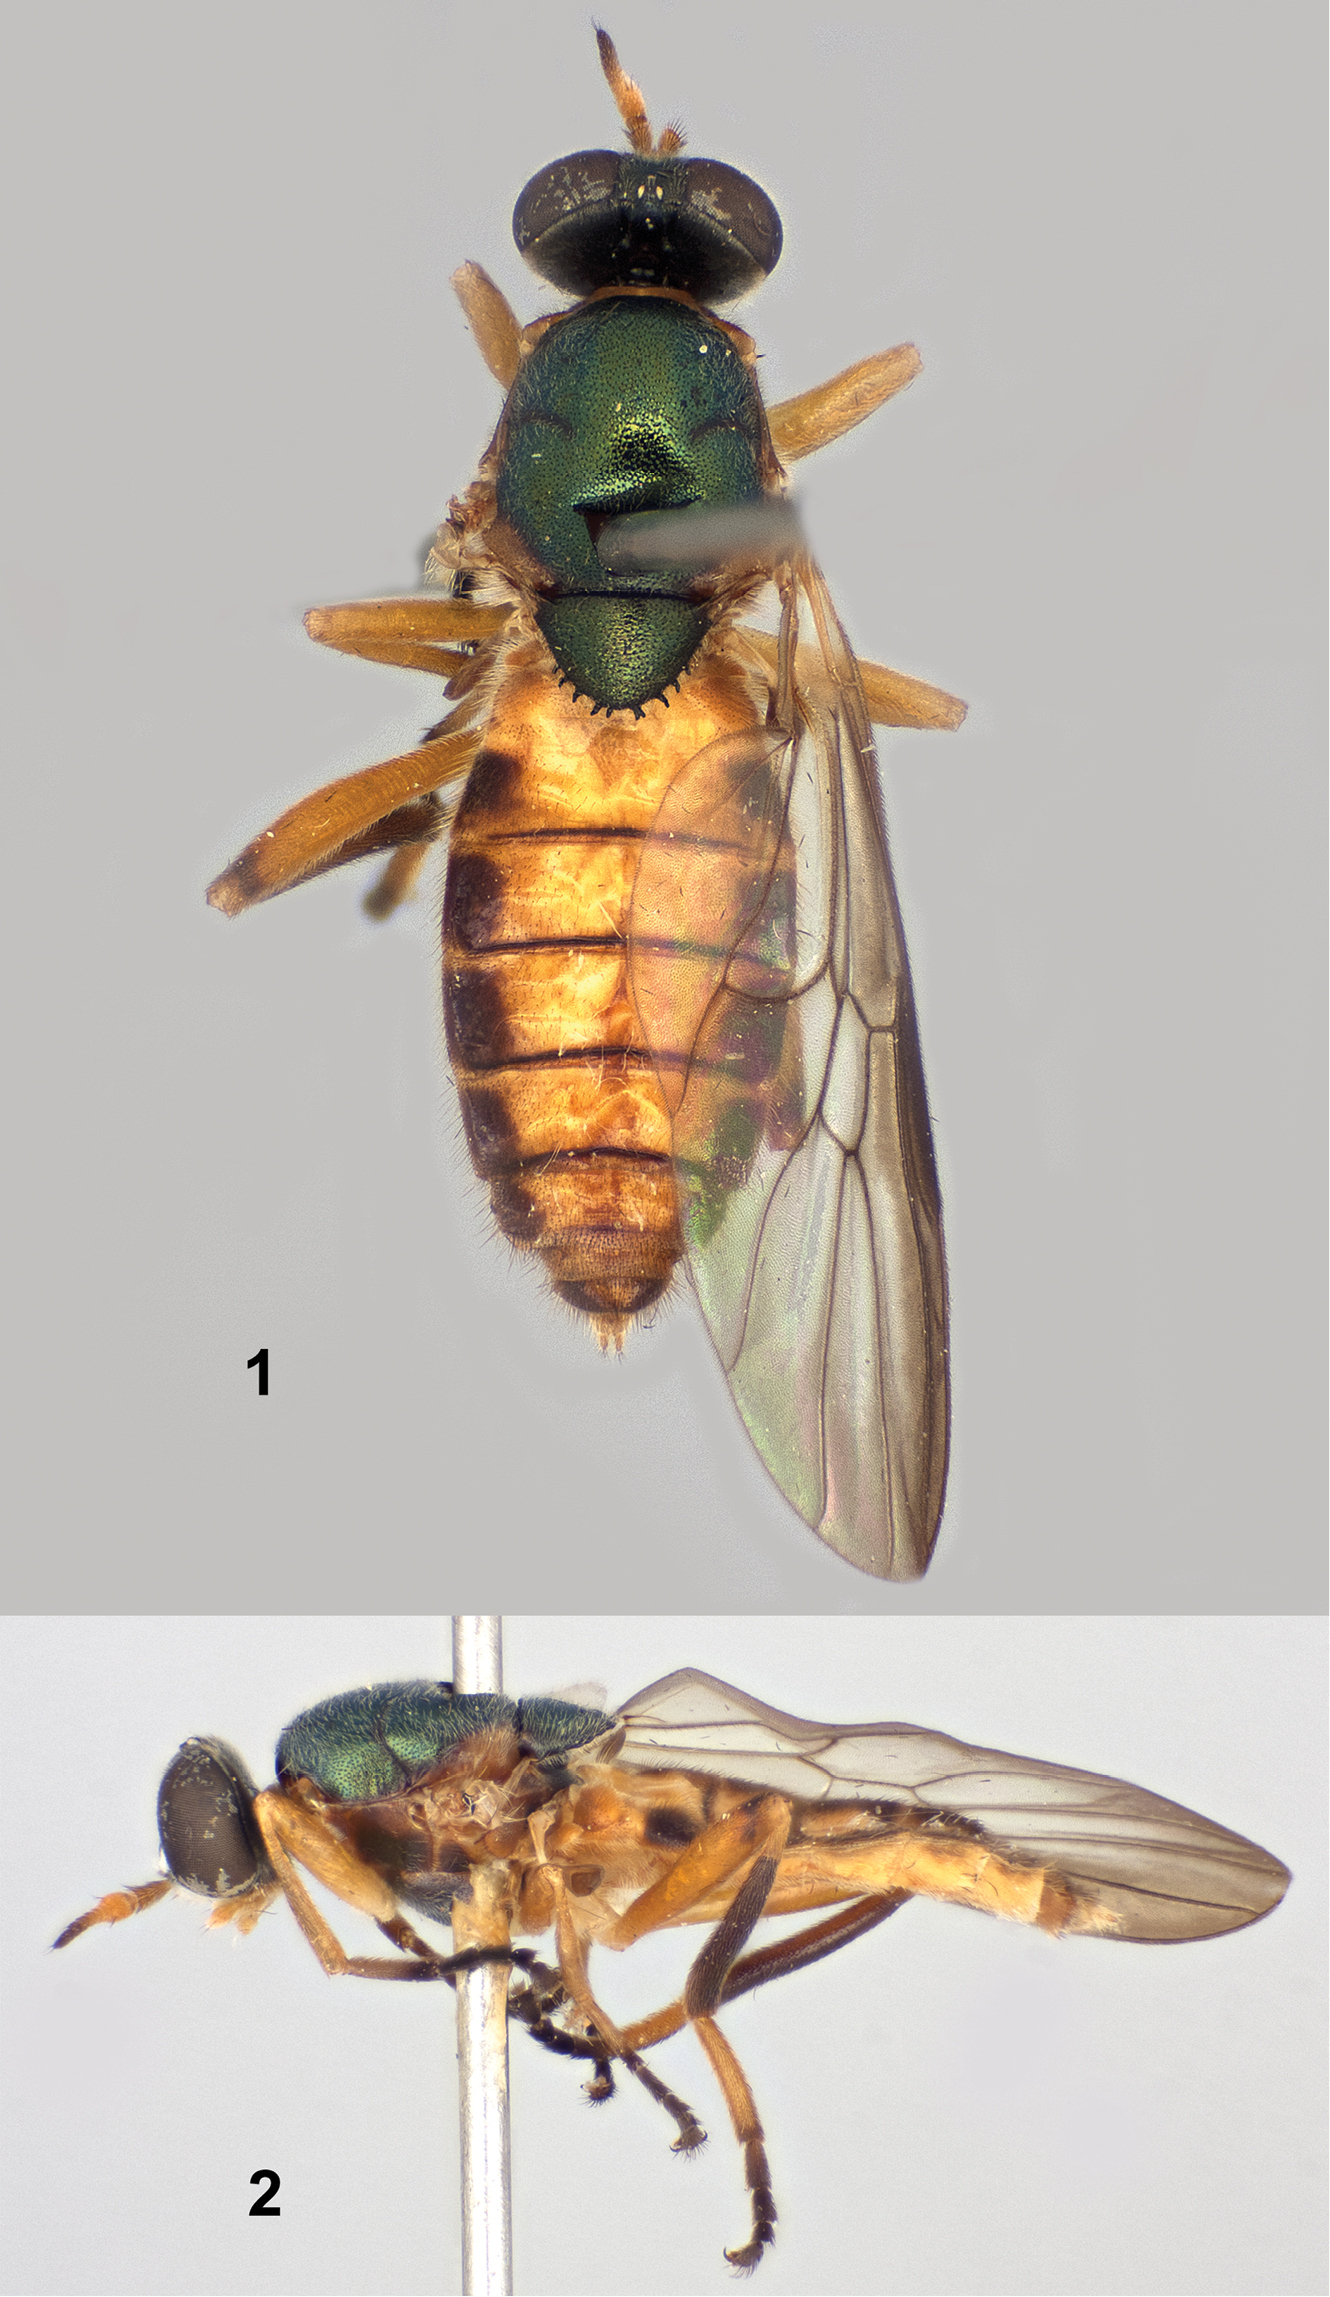 Paraberismyia chiapas Woodley - Female holotype (Figures 1 & 2 from Woodley, 2013)